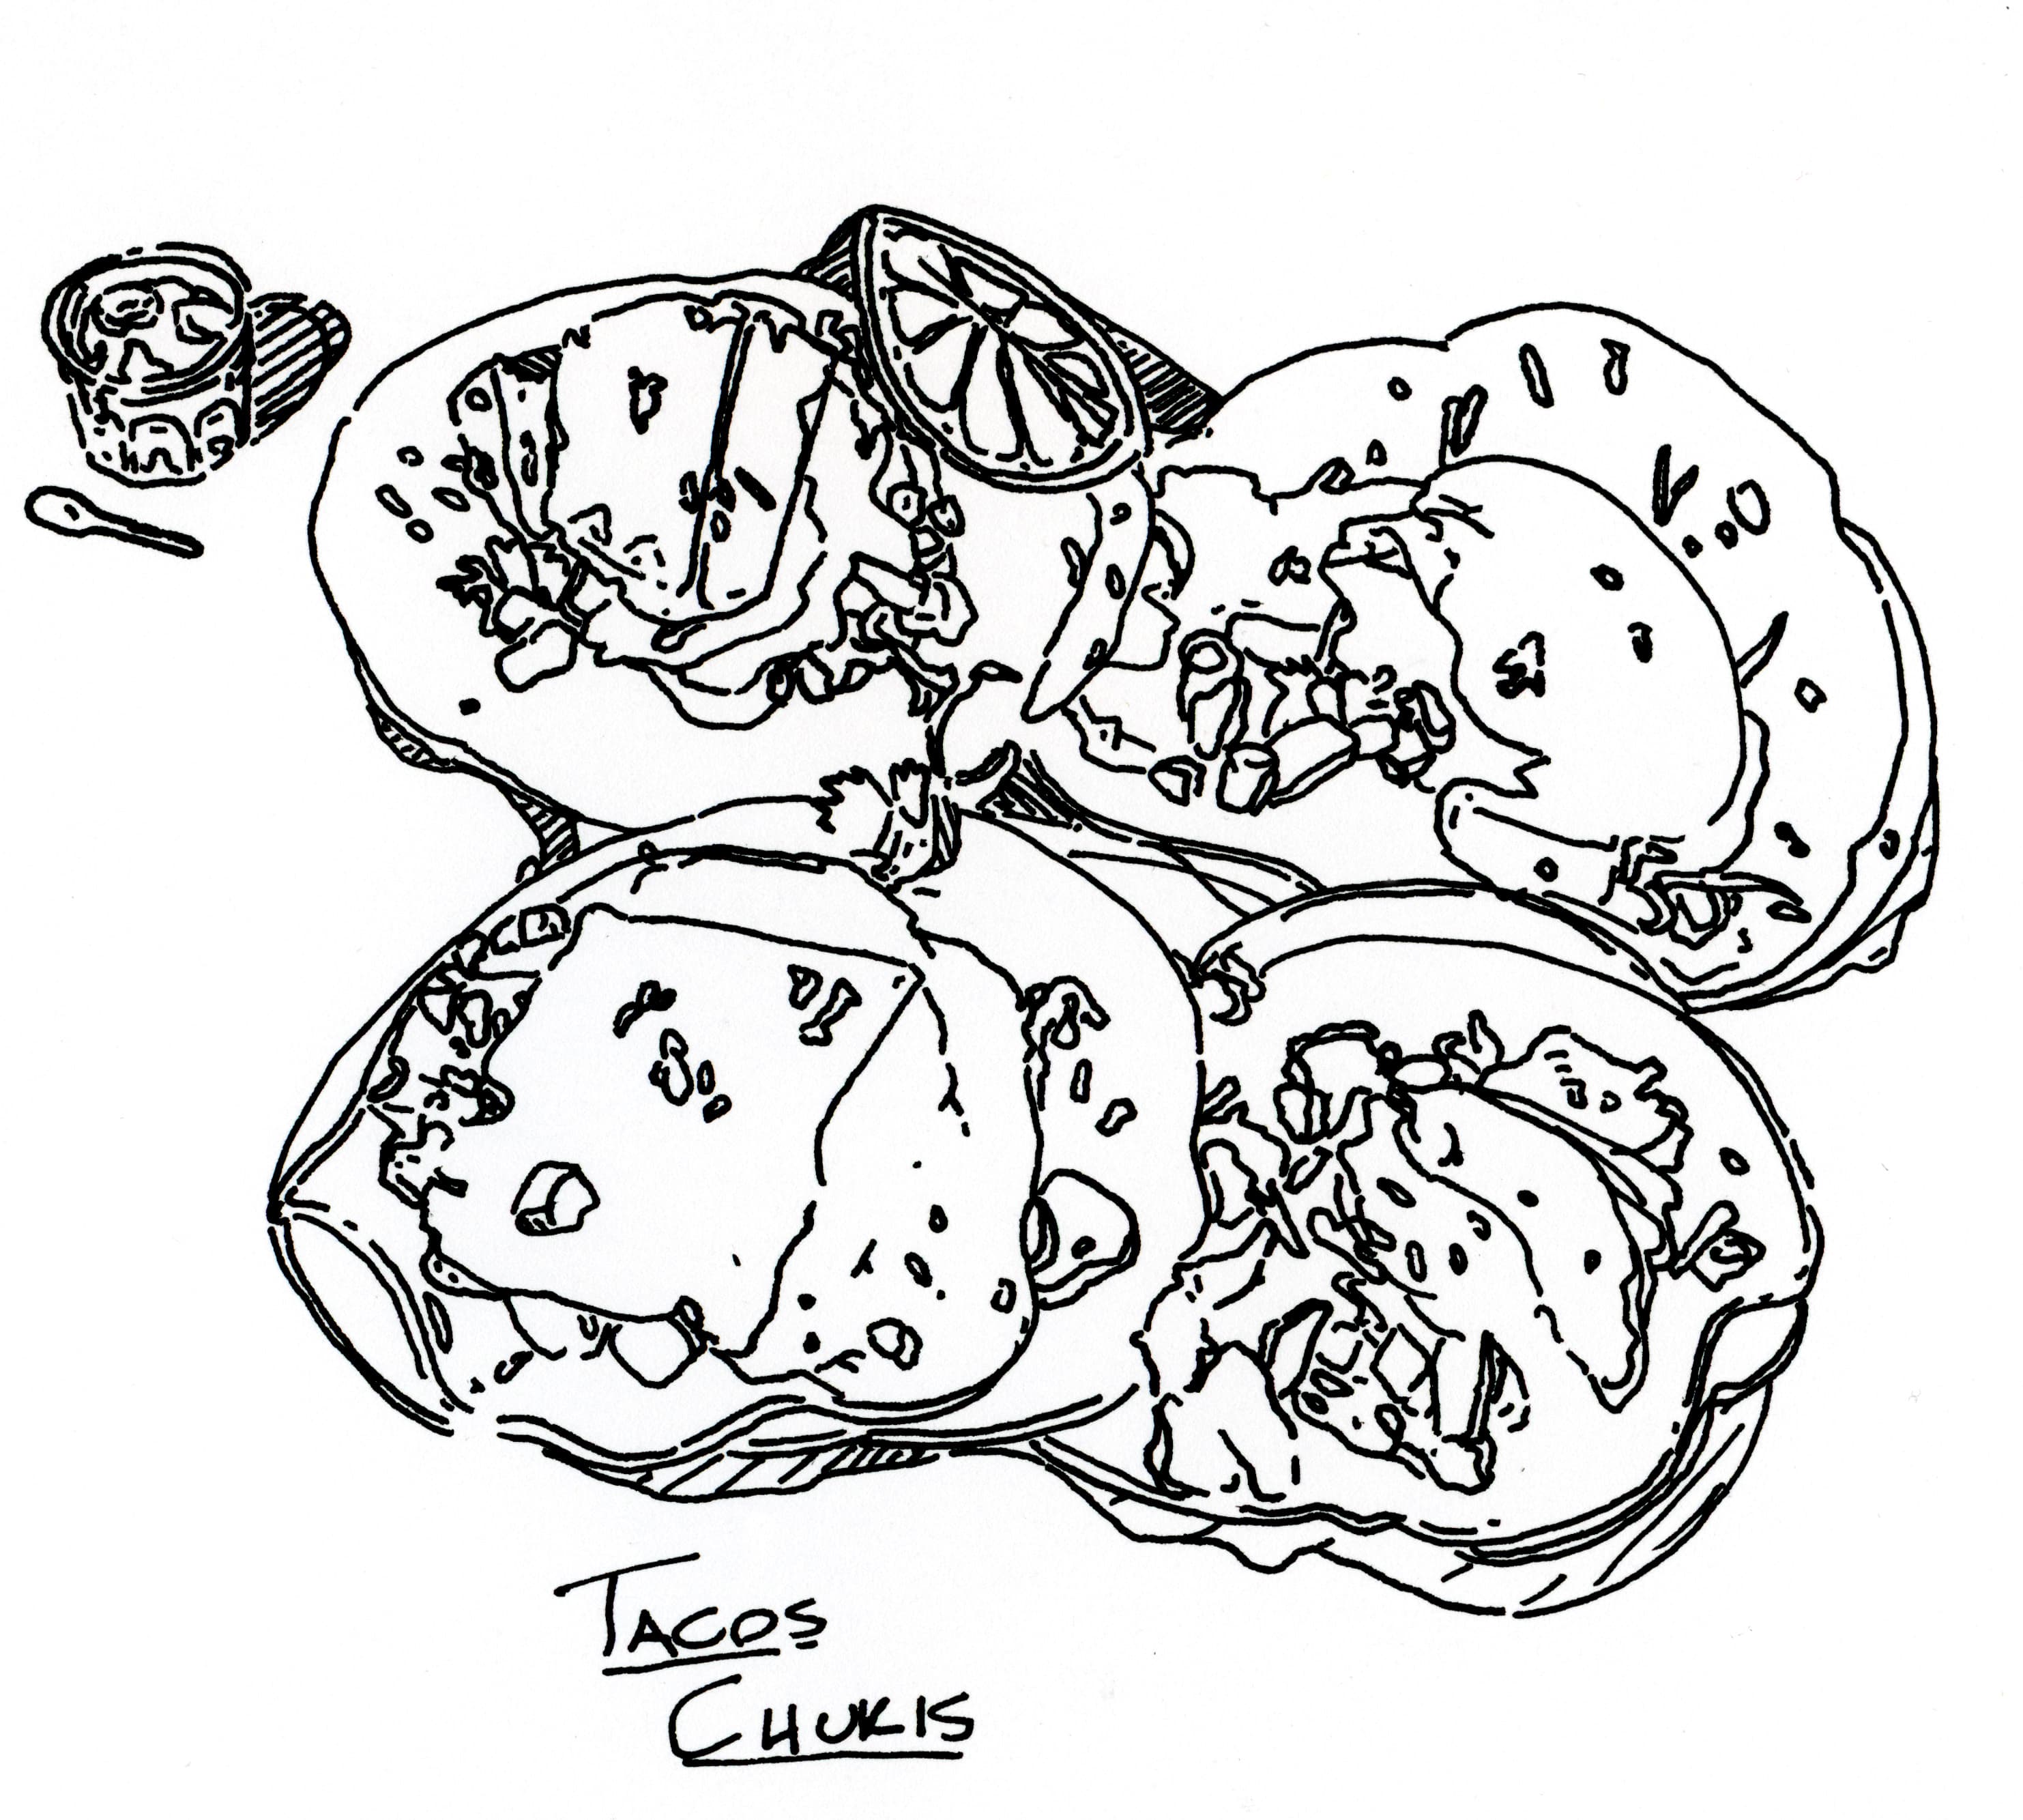 Ink drawing of four tacos